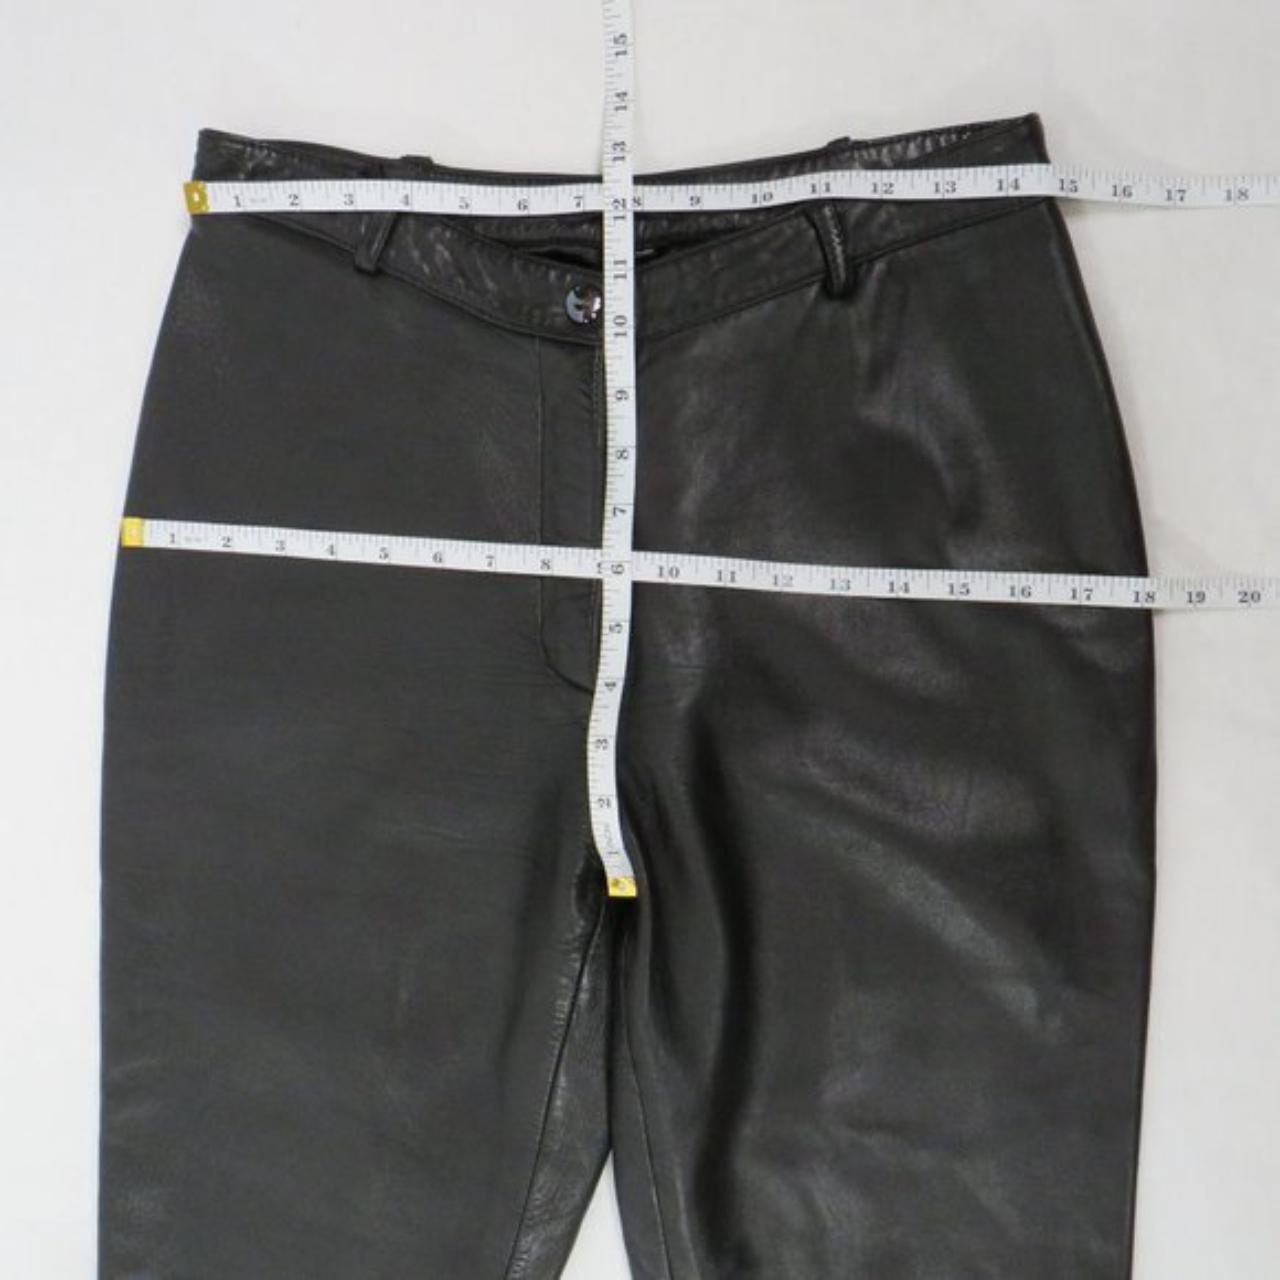 Guess Collection black leather high-rise pants.... - Depop